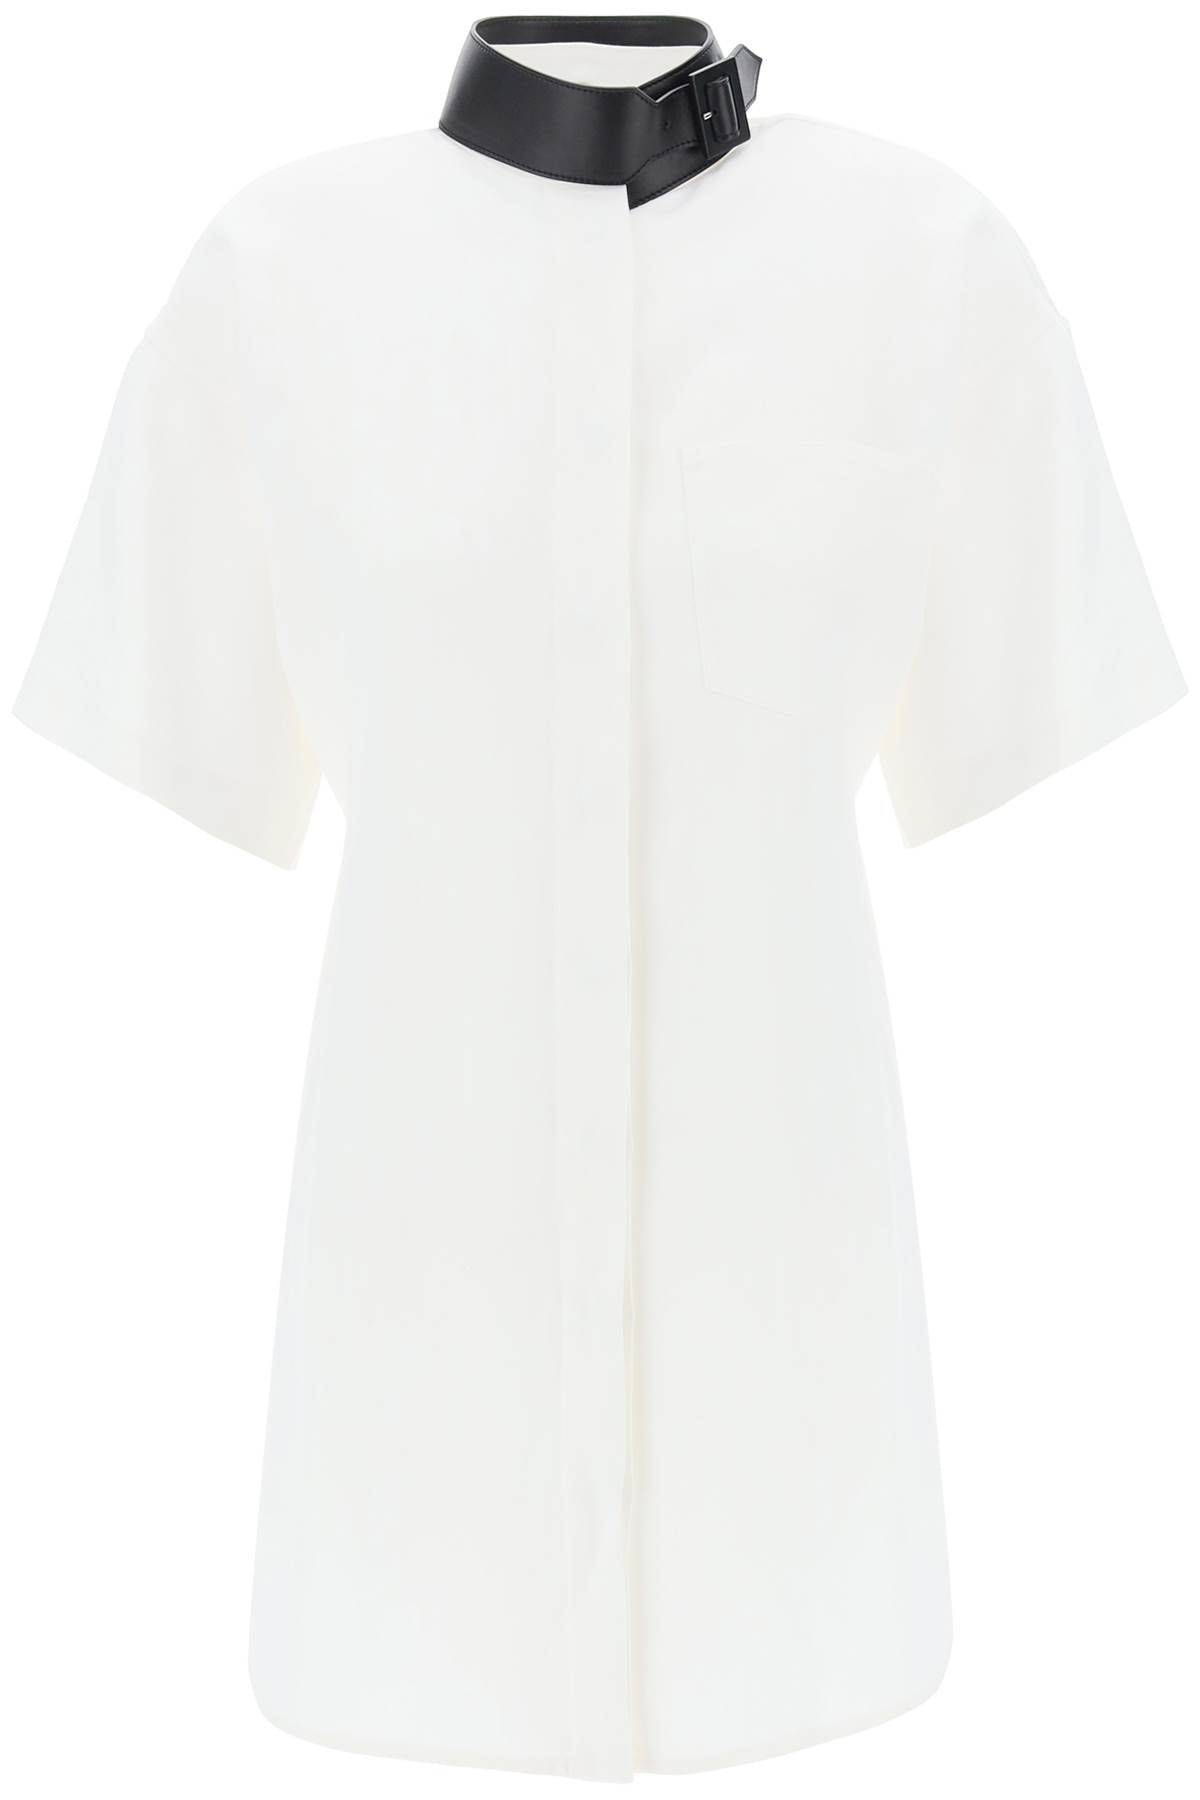 Shop Ferragamo White Midi Chemisier Dress With Faux Leather Strap And Buckle